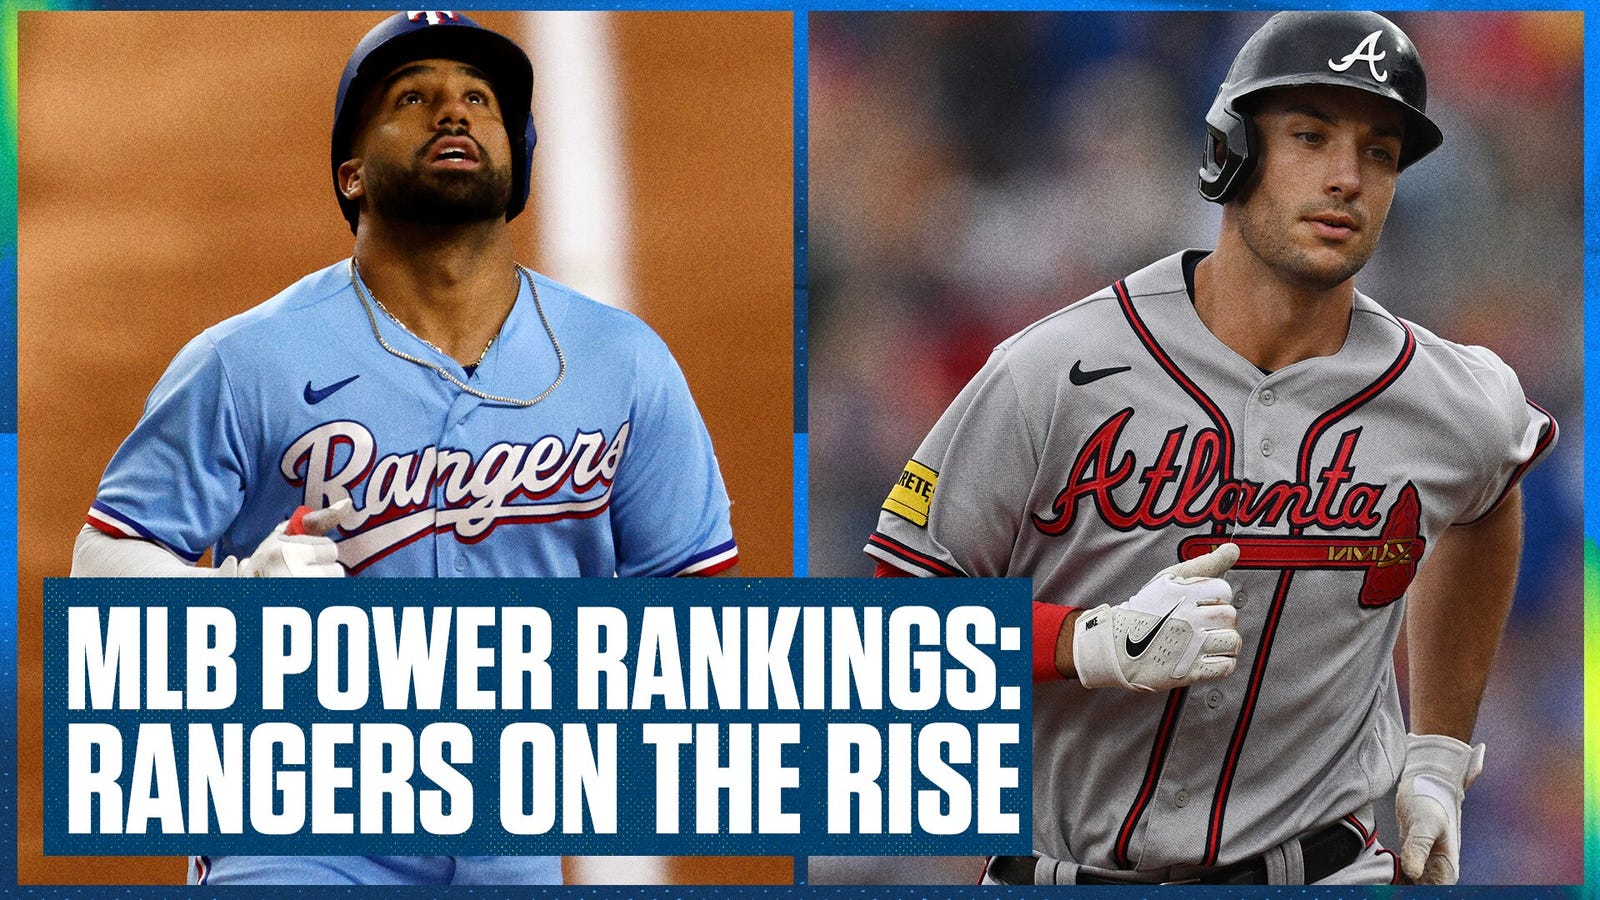 MLB Power Rankings: Texas Rangers move into the Top 3